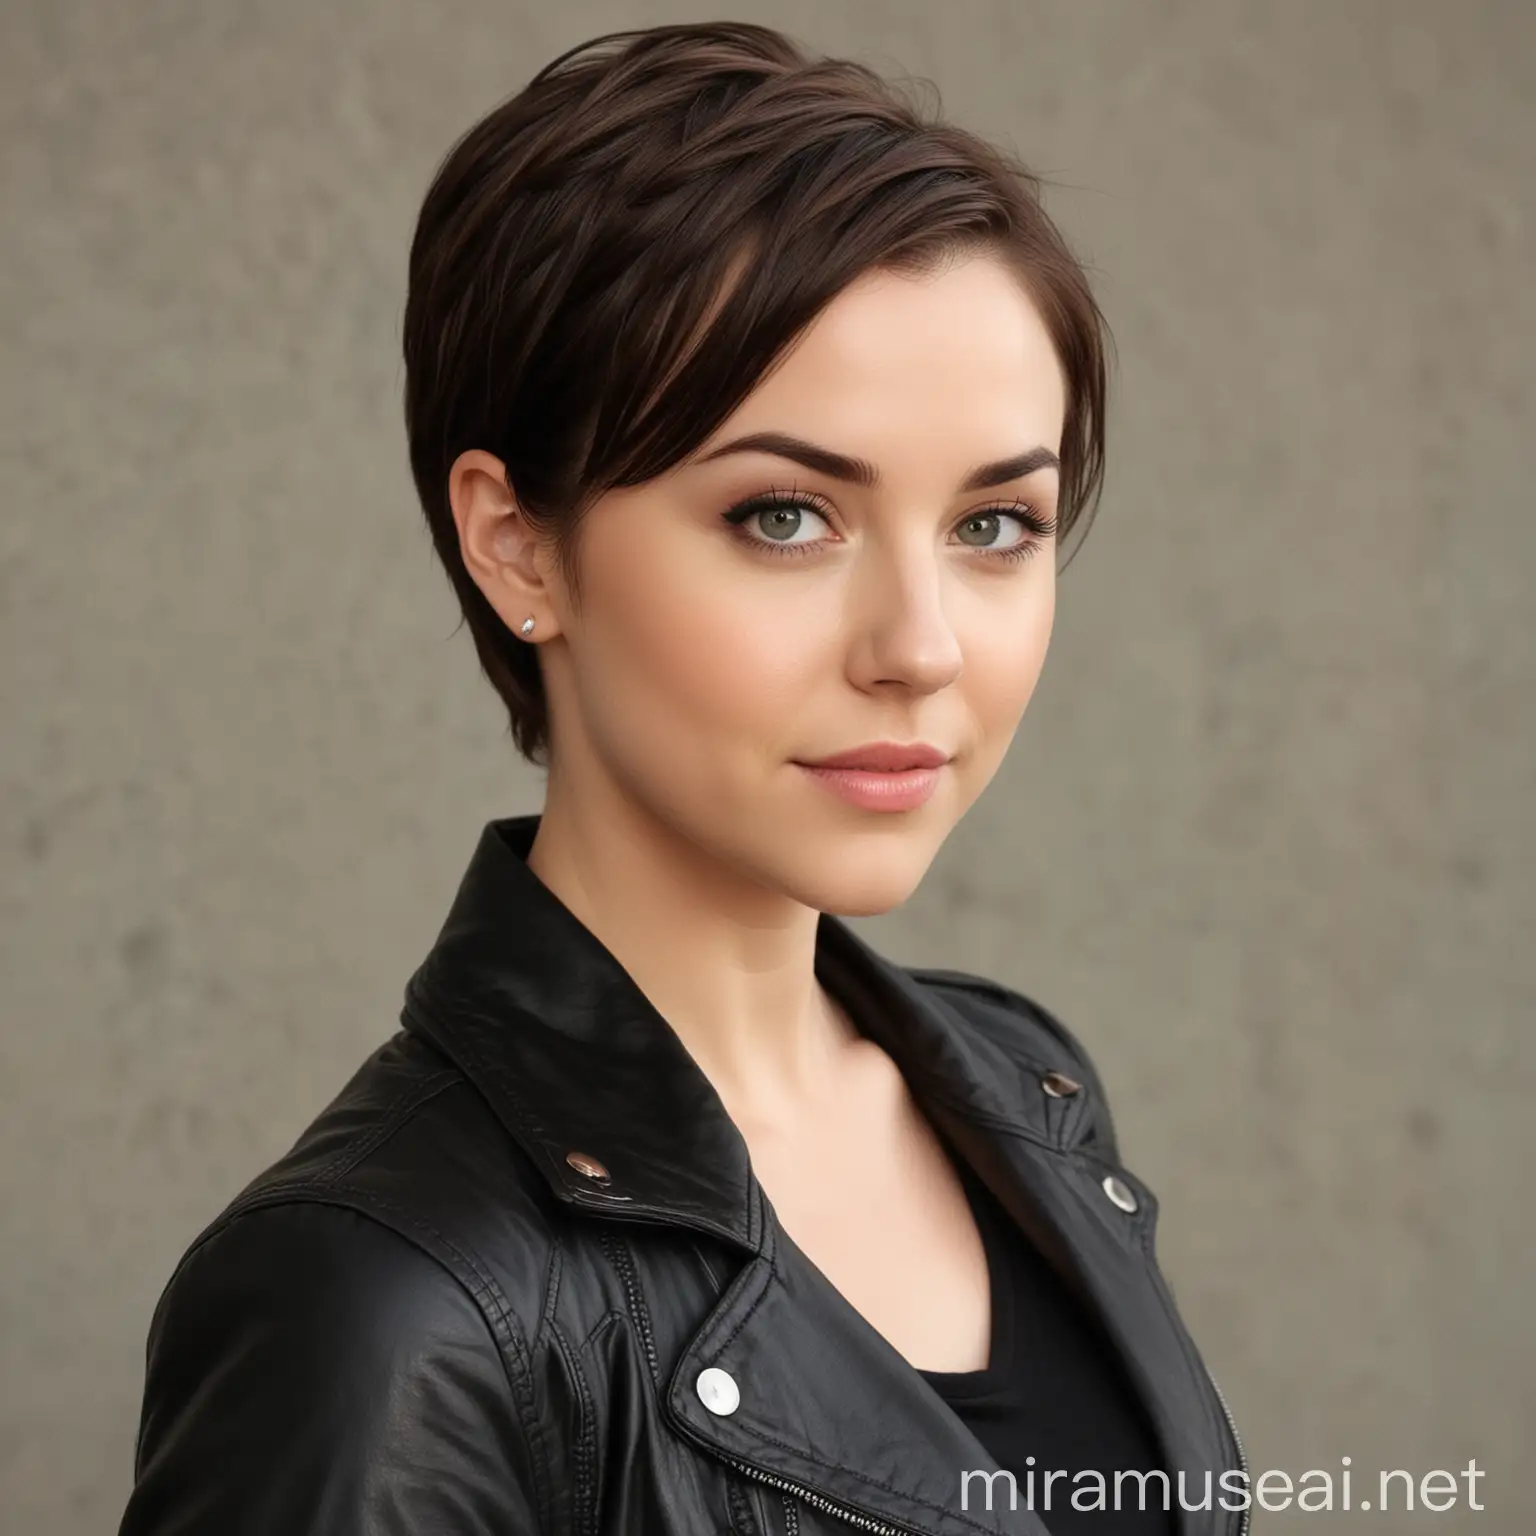 Brittany Curran with short hair, Black jacket.